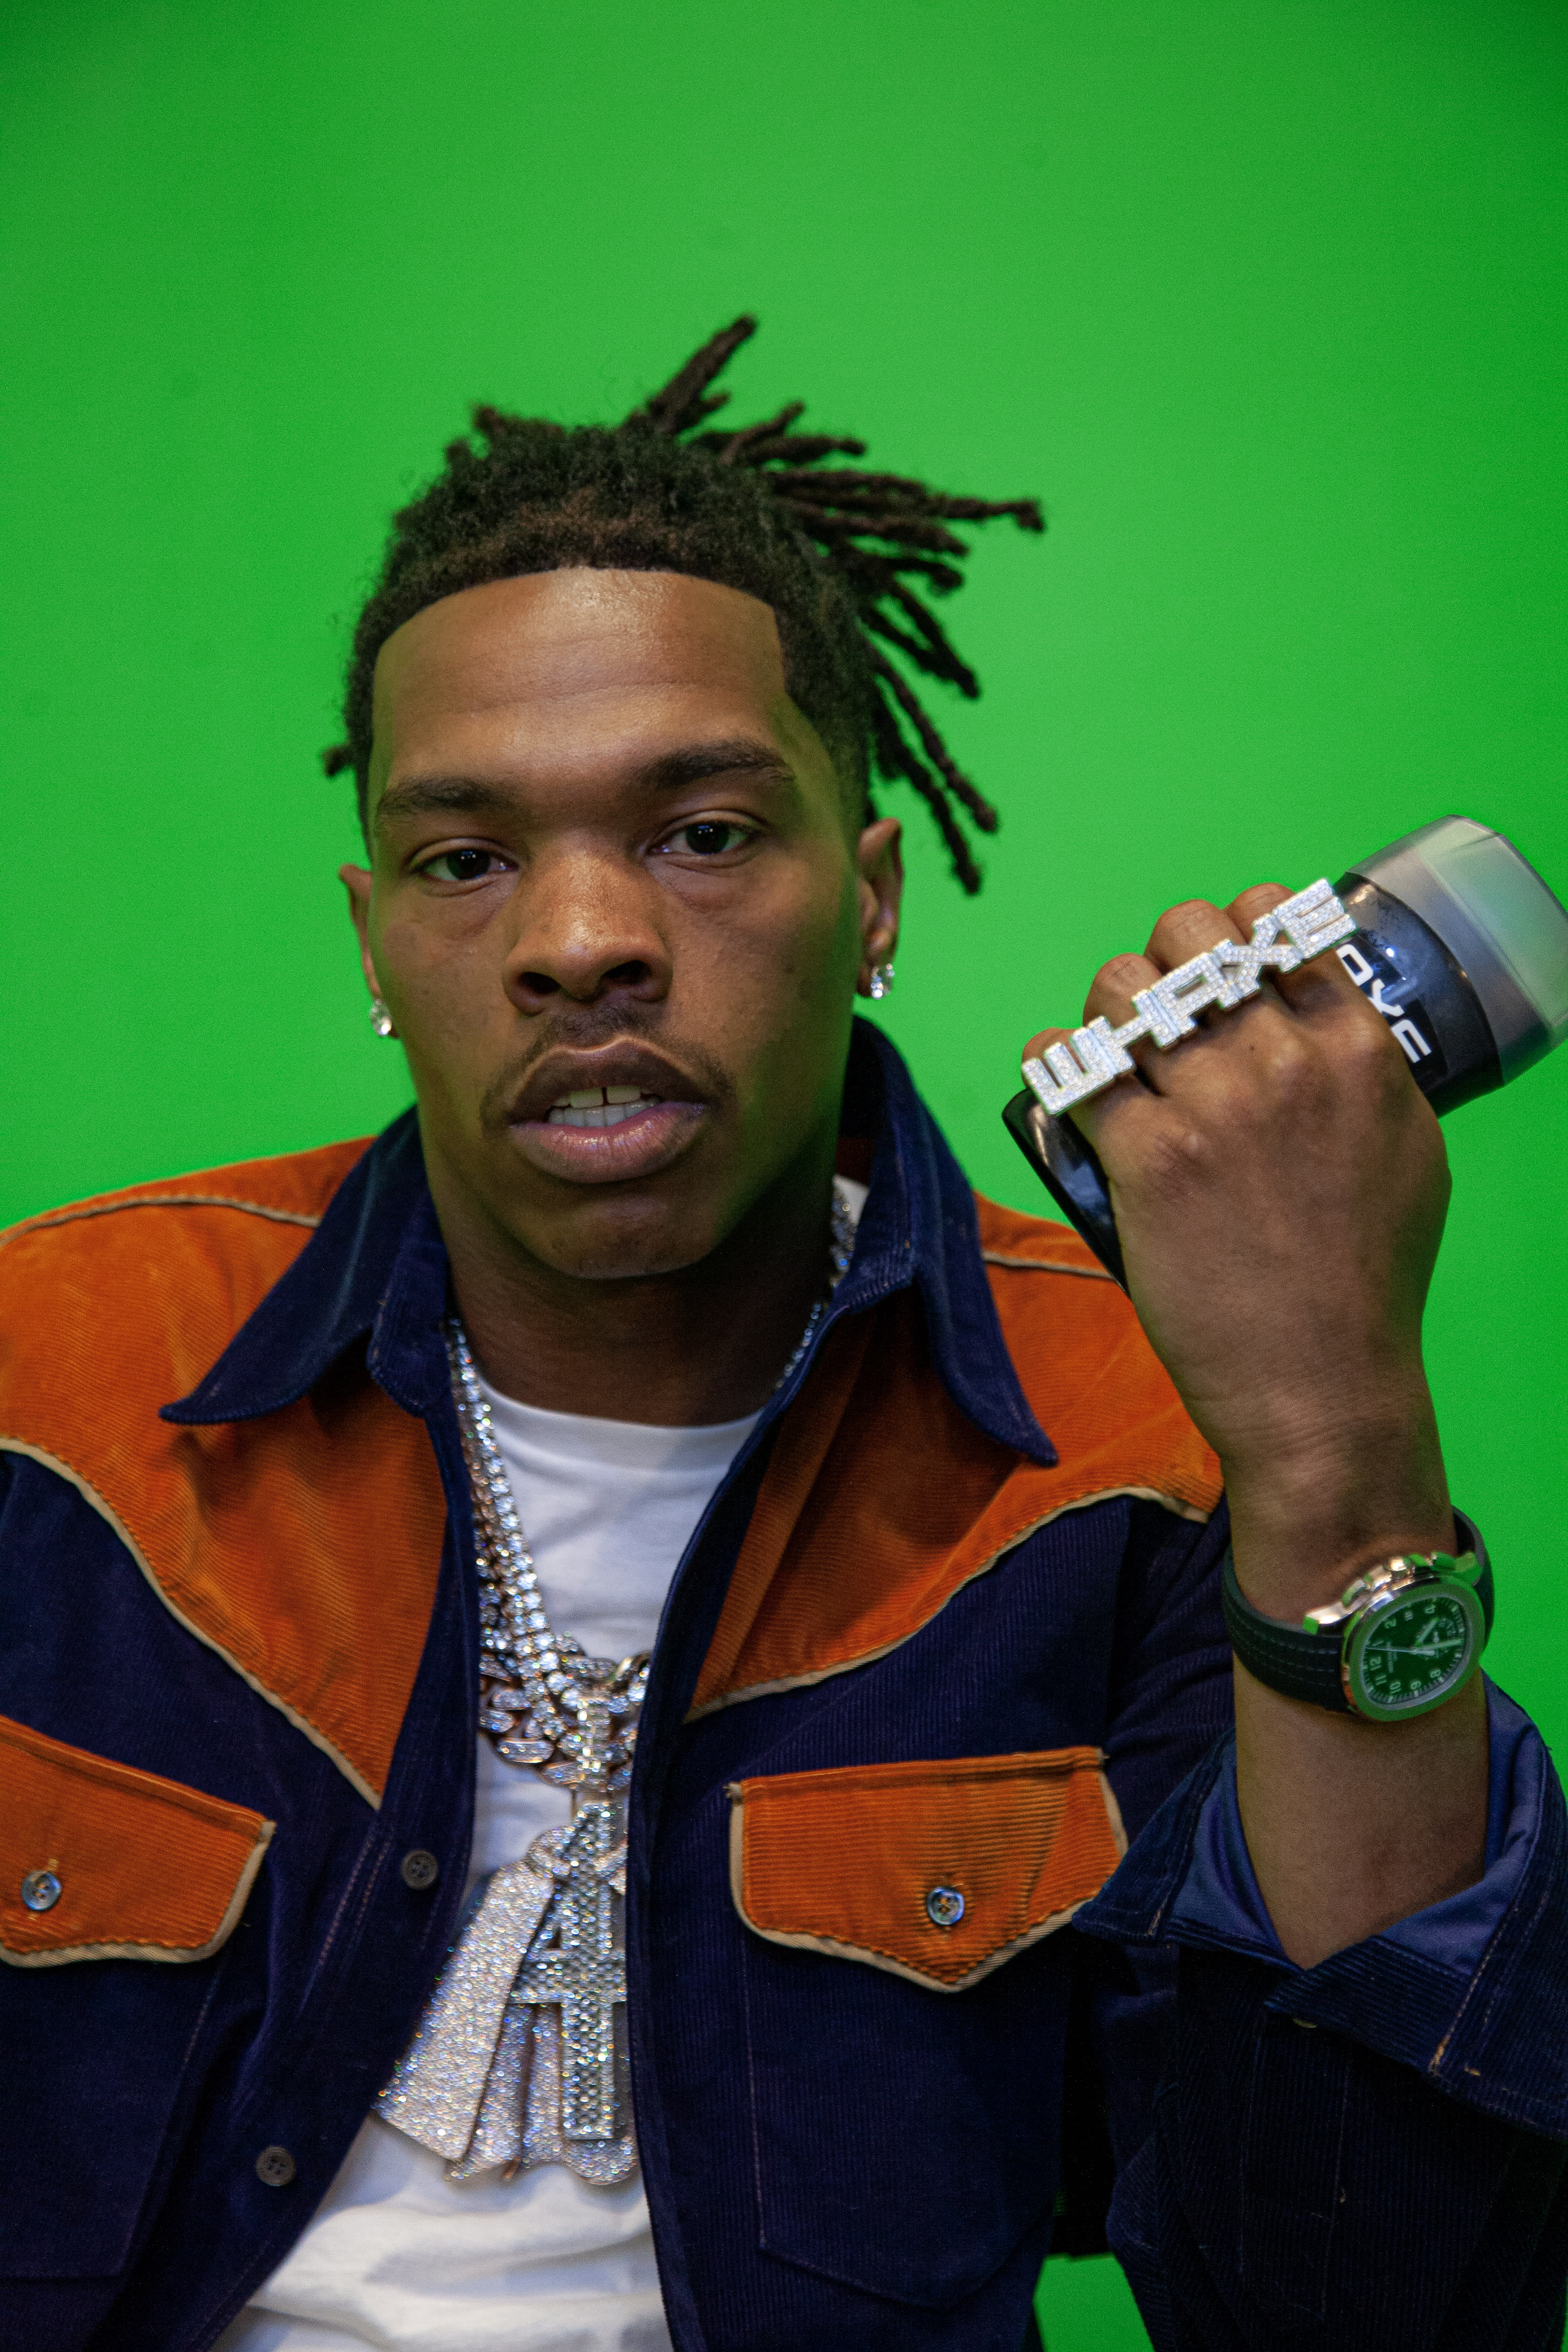 Photo of Lil Baby promoting new AXE body spray products